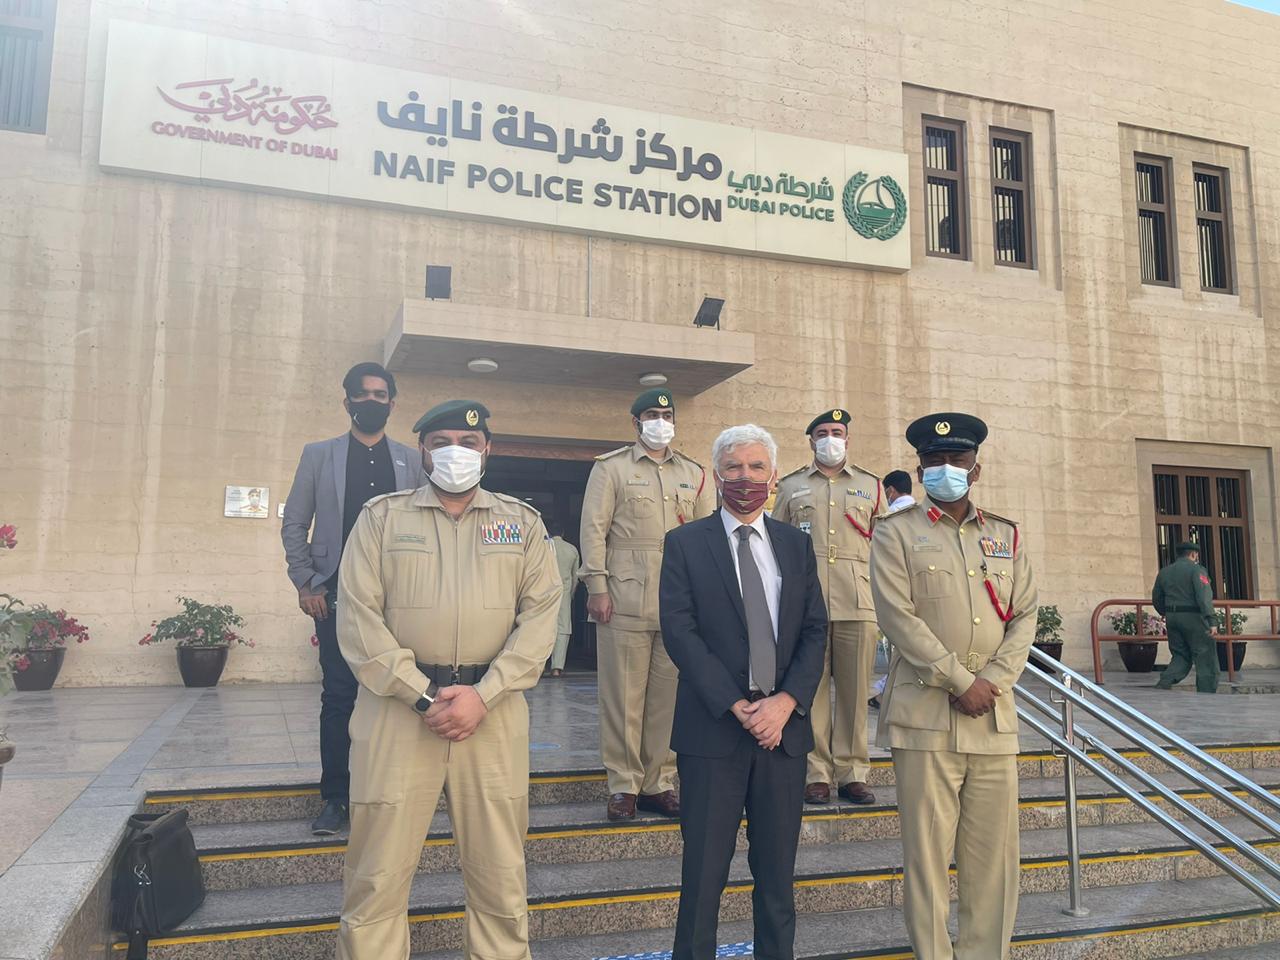 Lessons Learned from Covid-19: Research with Dubai Police